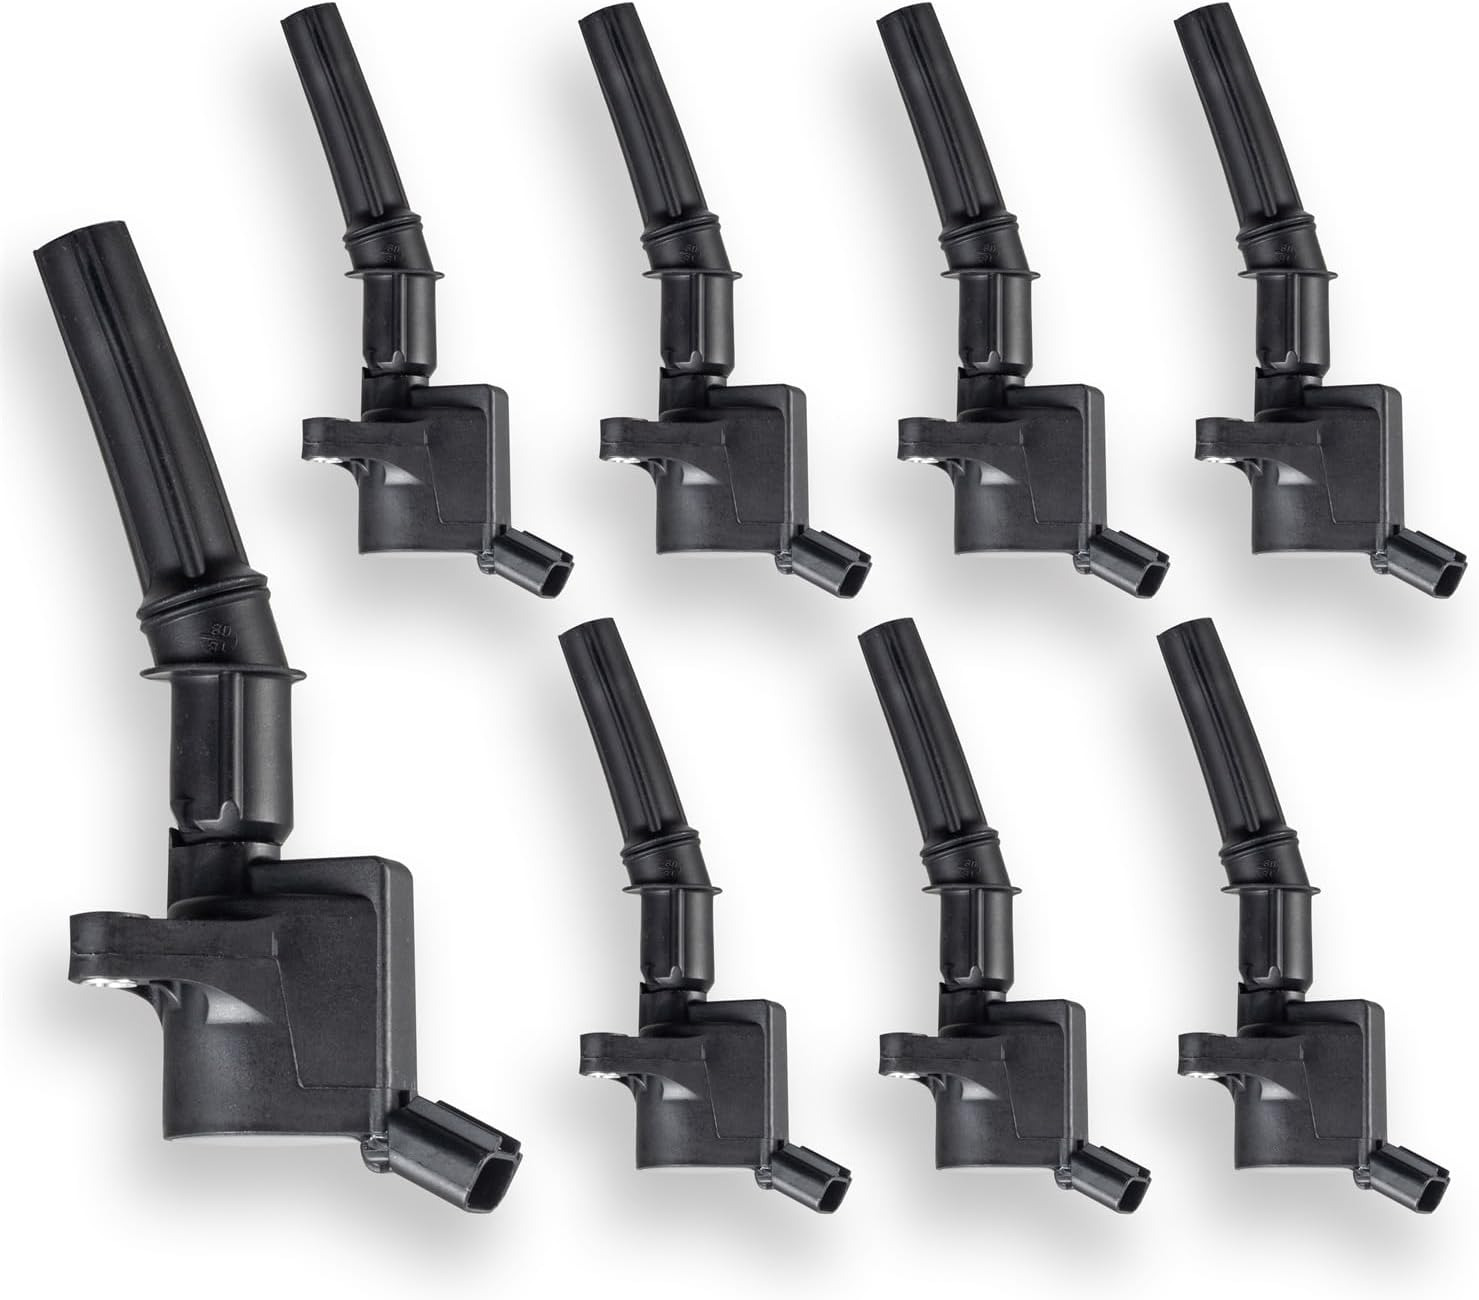 Set of 8 Curved Boot Ignition Coil Pack Compatible with Ford Lincoln Mercury 4.6